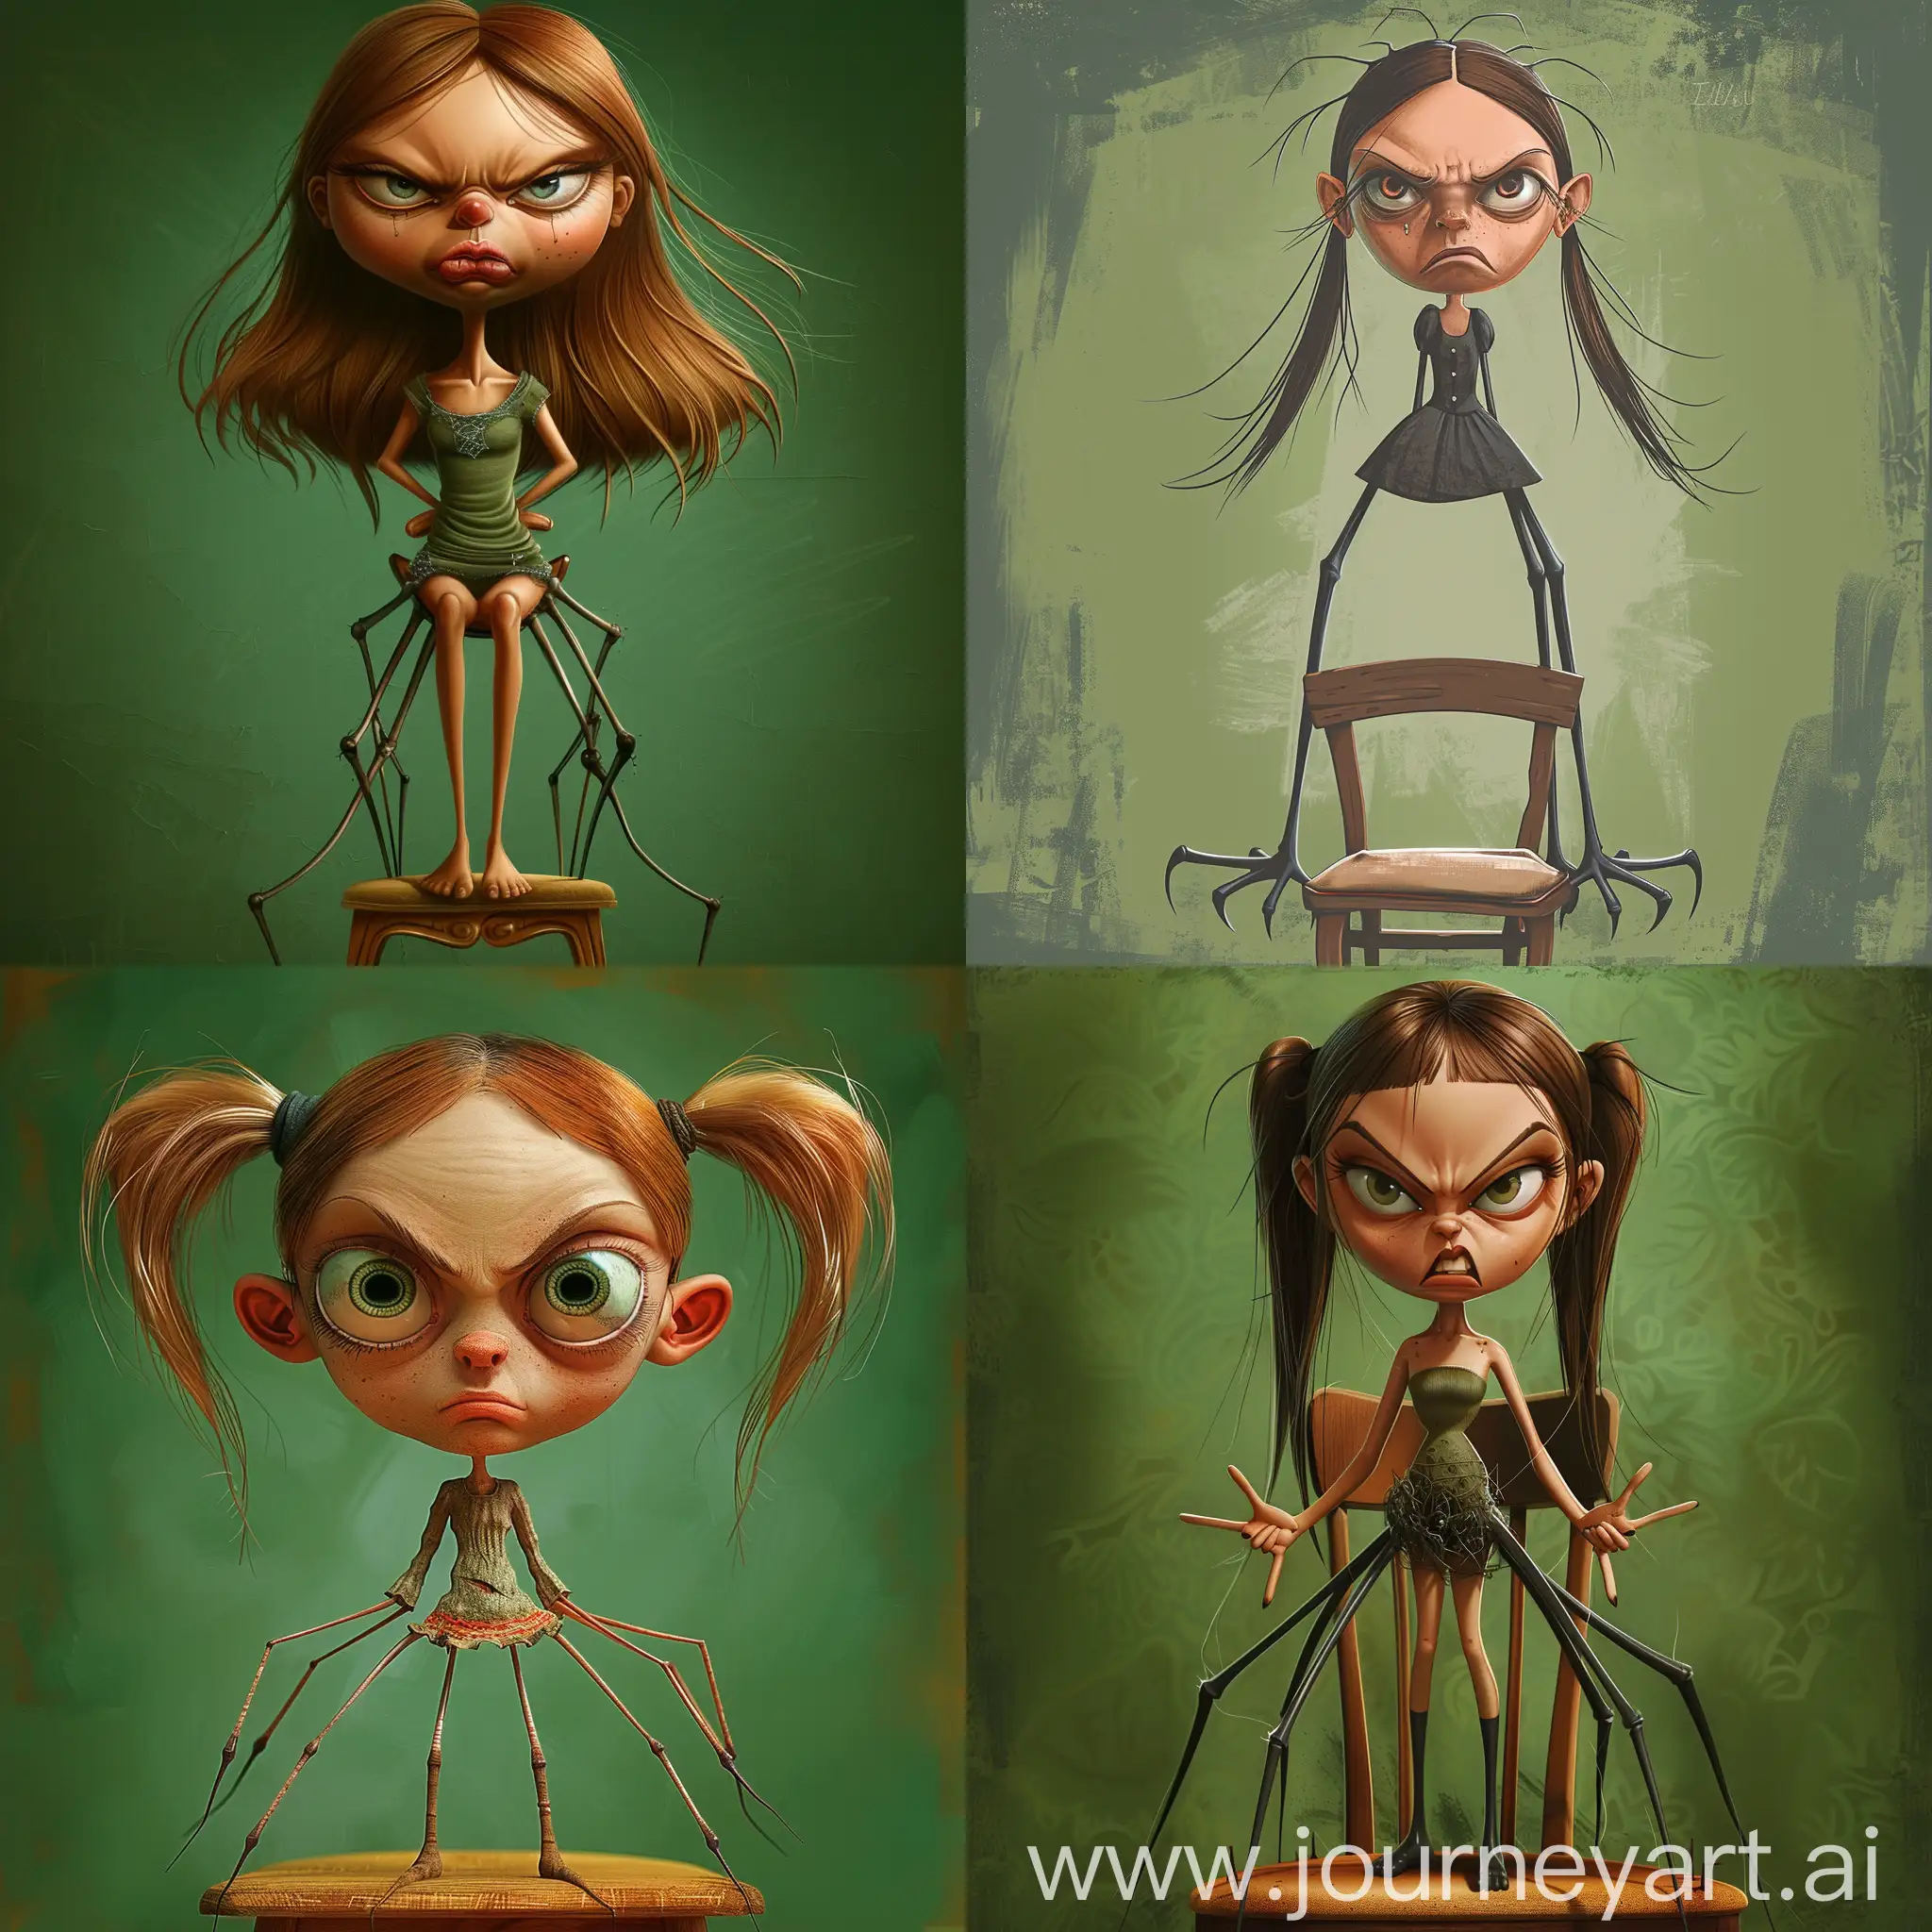 Angry-Funny-Skinny-Spider-Girl-Standing-on-Chair-with-Green-Background